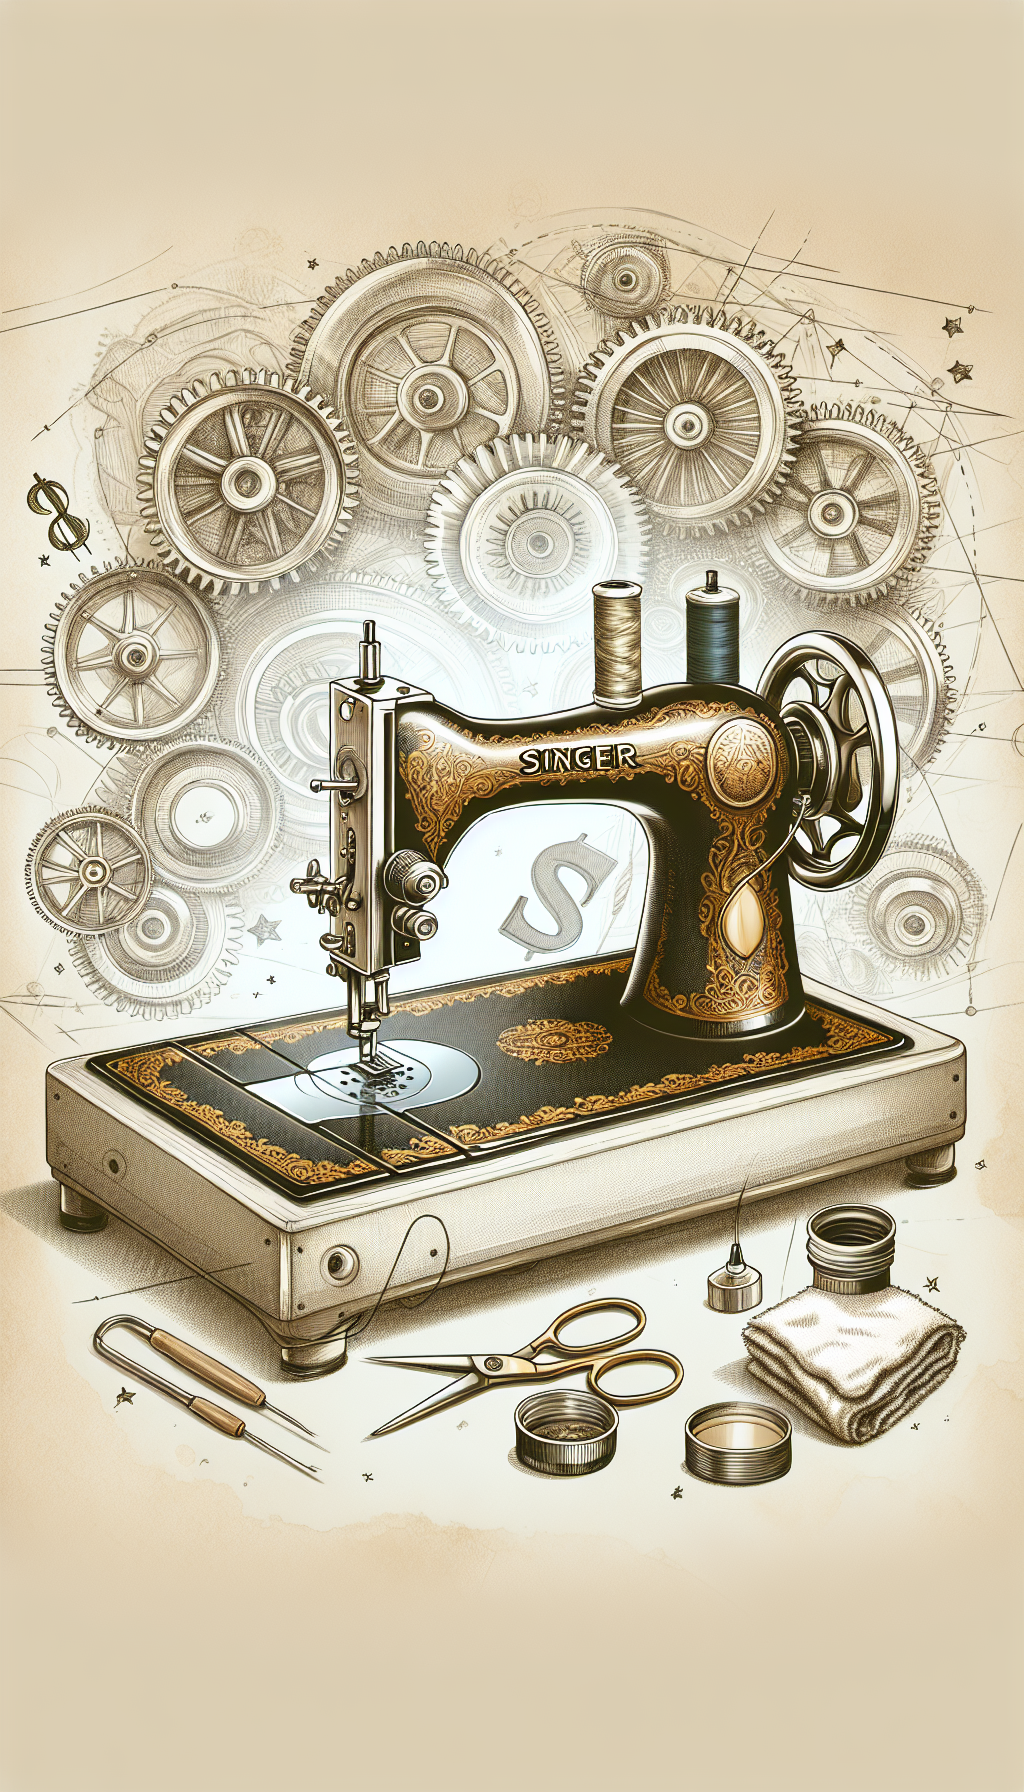 An illustration showcasing a pristine vintage Singer sewing machine with ornate, golden gears. A translucent overlay of maintenance tools such as a small oil can and a soft cloth encircles the machine, alongside faint dollar signs and stars to symbolize value. The edges blur into sketches, conveying a blend of maintenance and the timeless elegance of antique Singer machines.